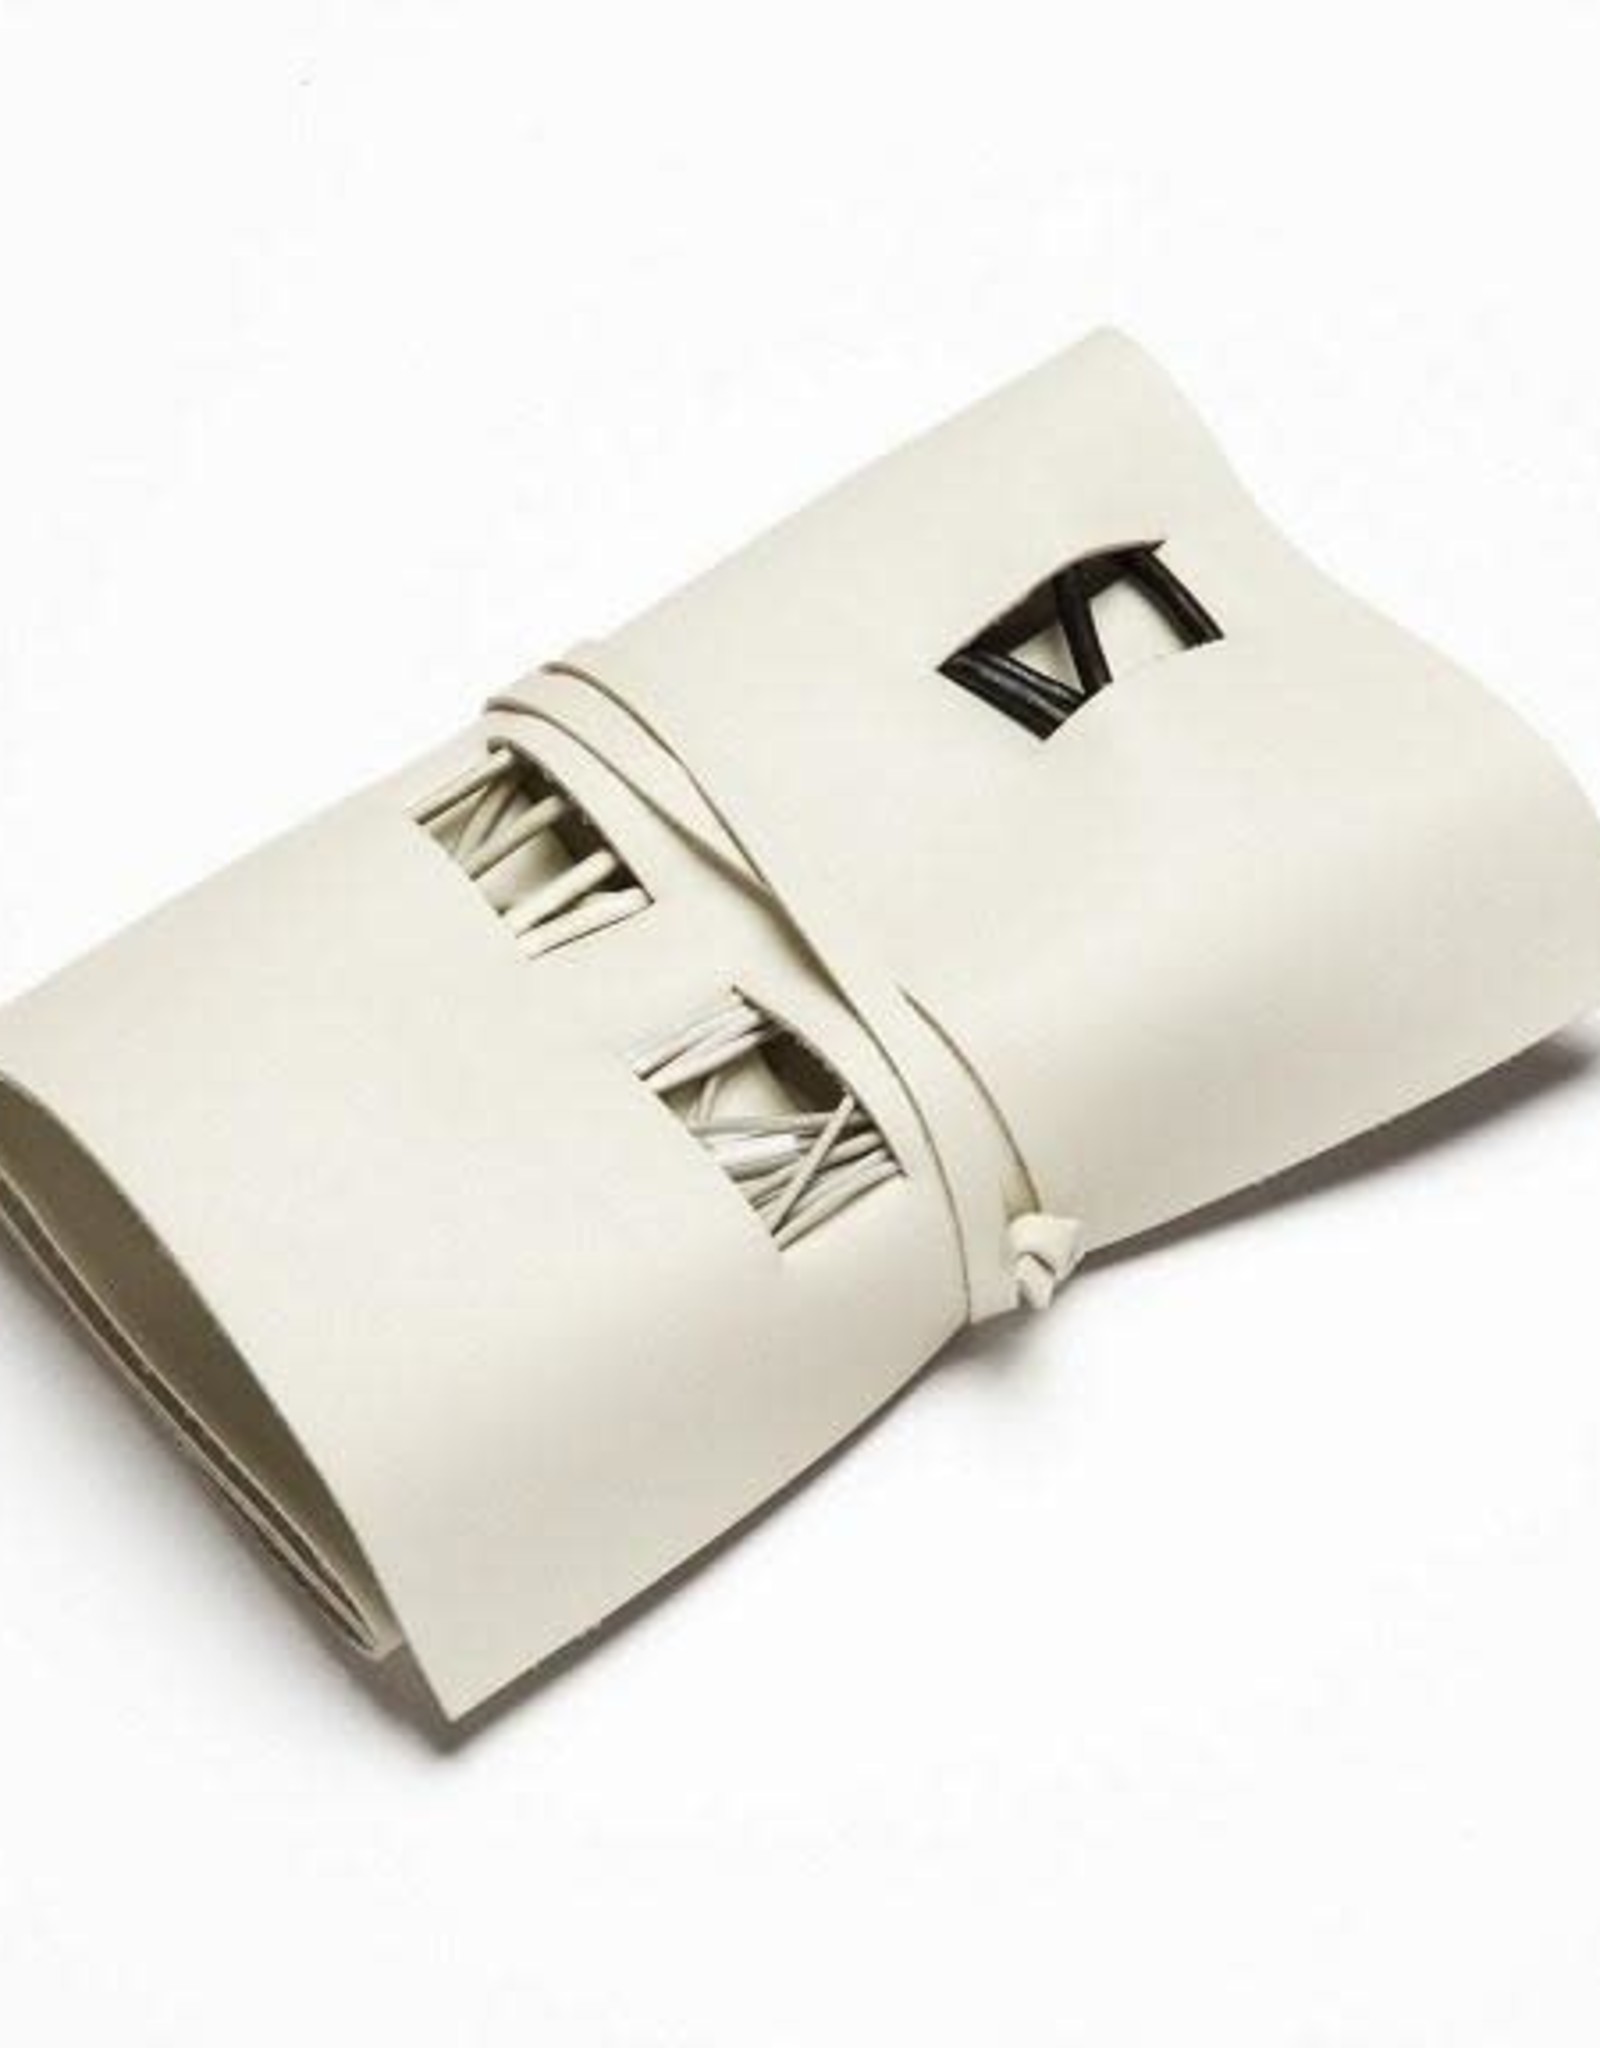 Brouk and Co. Travel Cord Roll-Cream